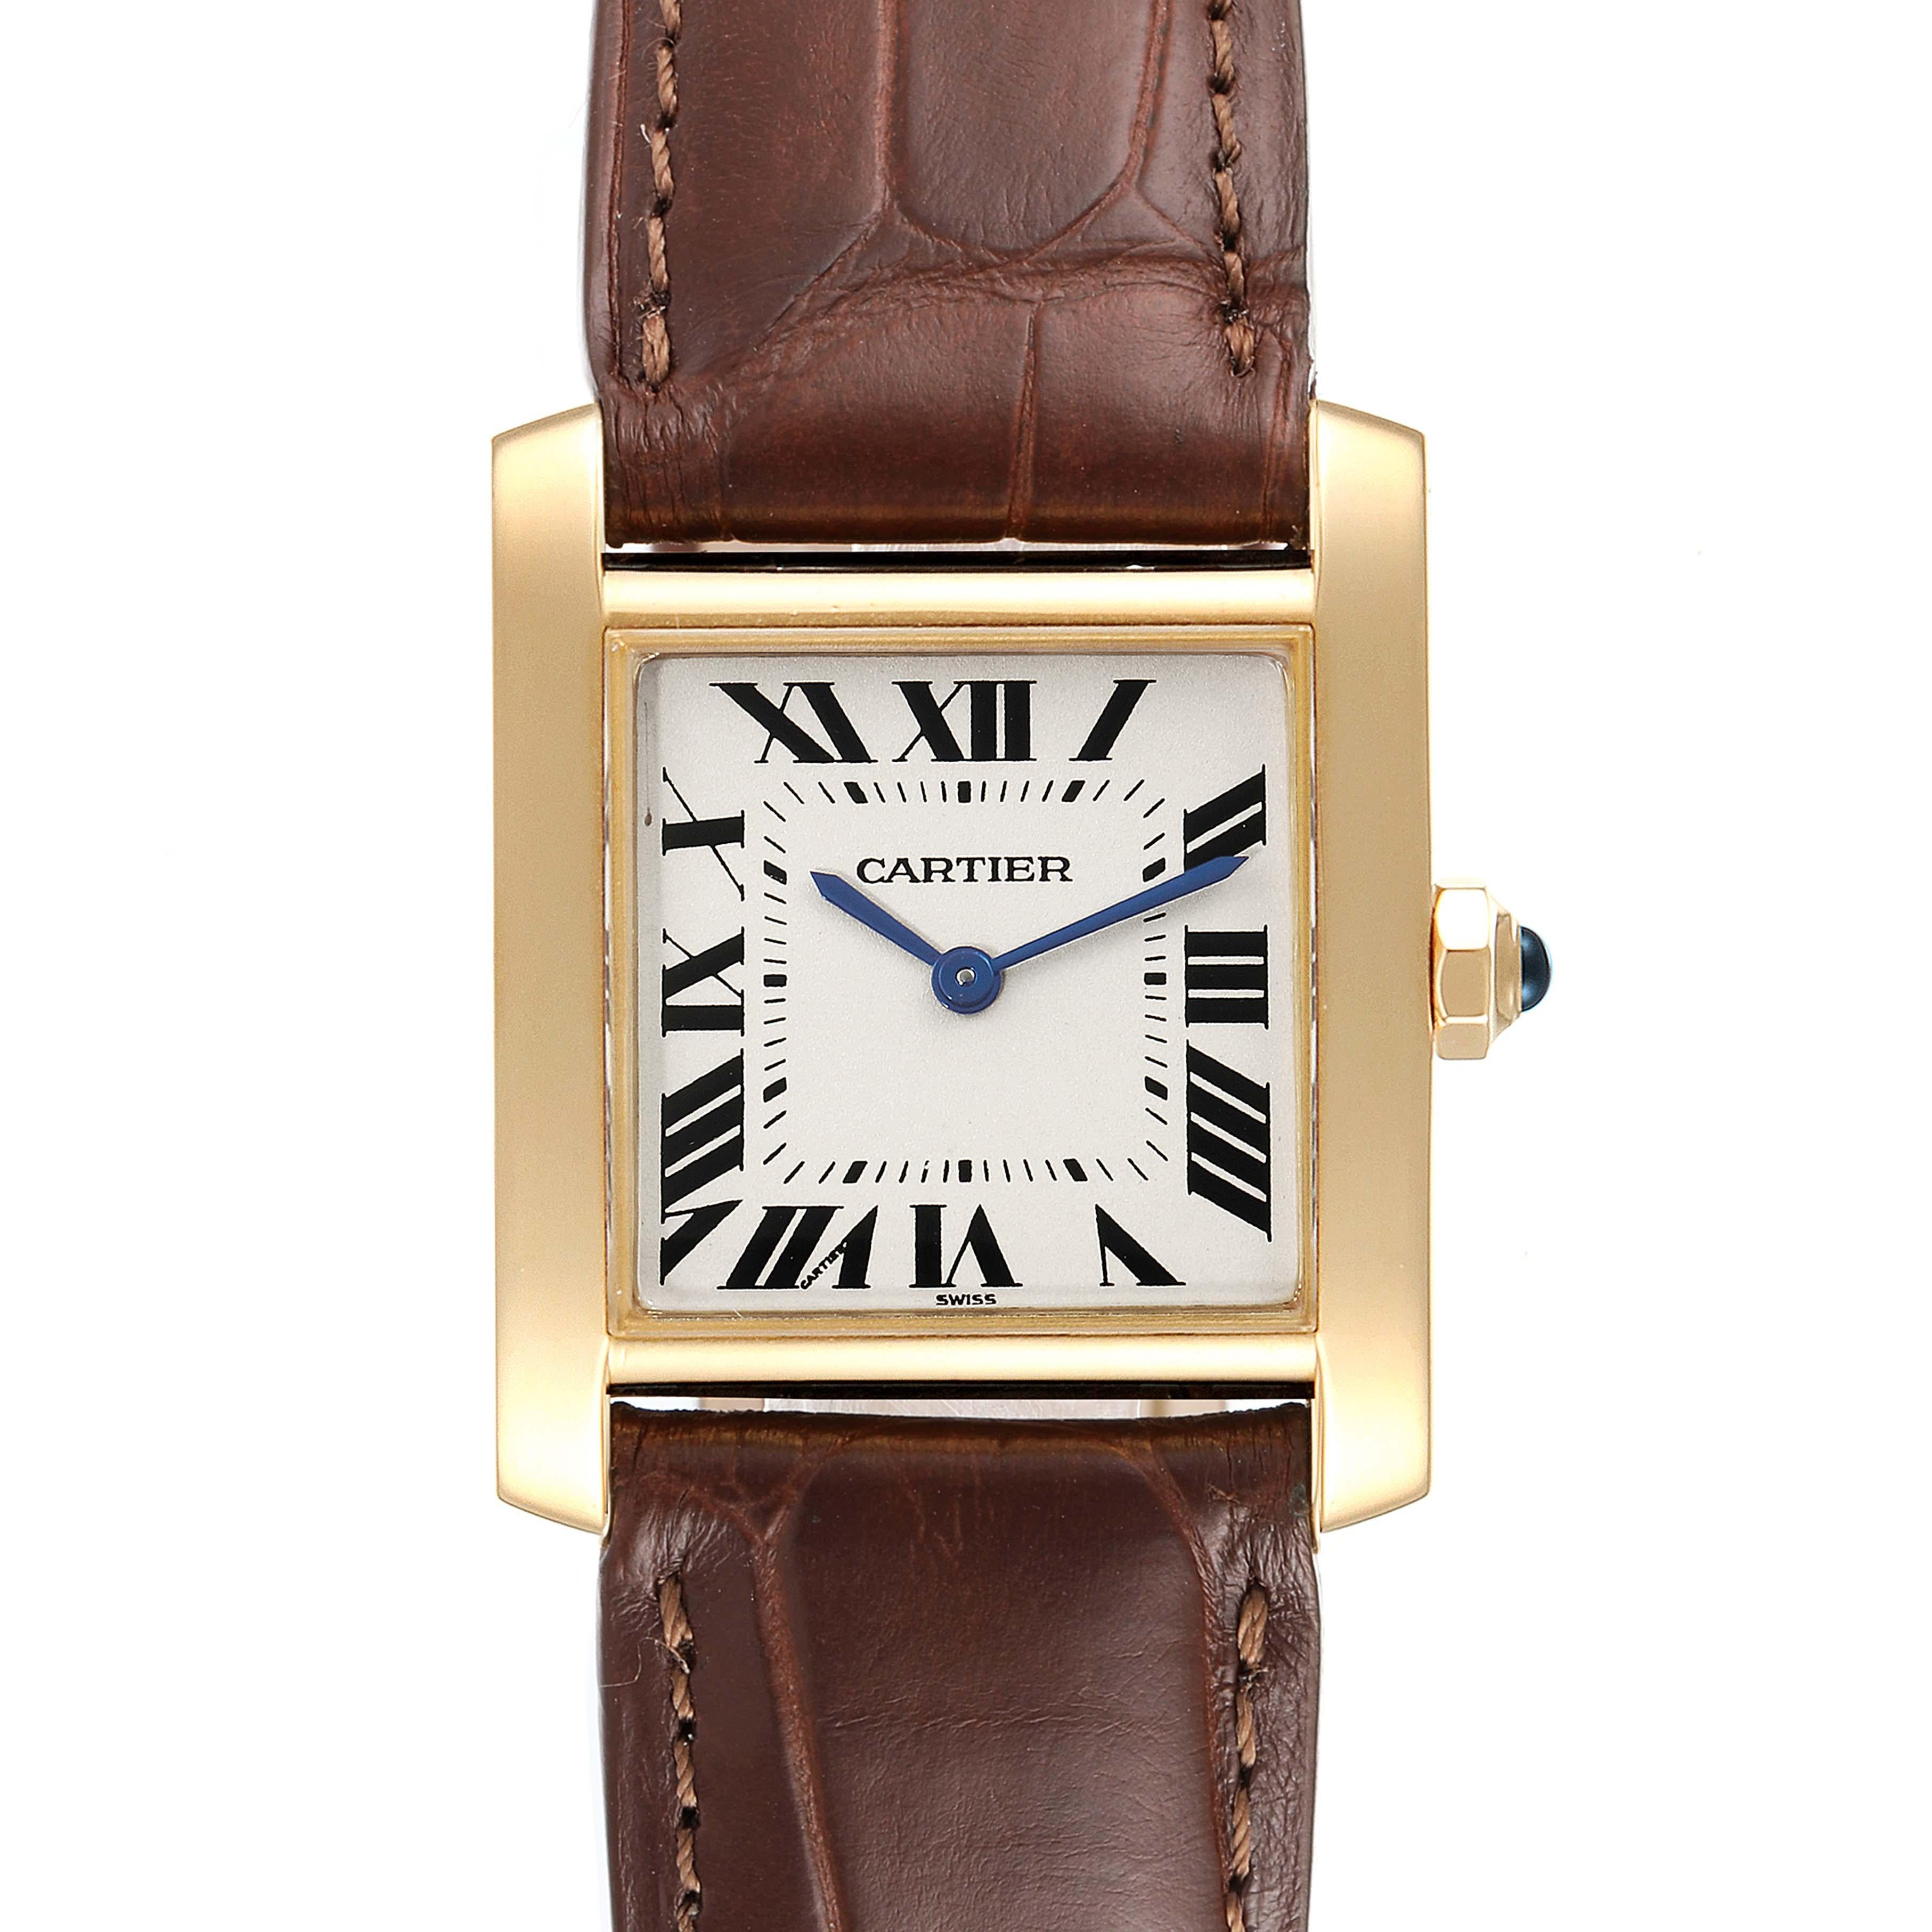 artier Tank Francaise Midsize Yellow Gold Ladies Watch W5000356. Quartz movement. 18K yellow gold 25 x 30 mm rectangular case. Octagonal crown set with a blue sapphire cabochon. . Scratch resistant sapphire crystal. Silver grained dial with painted